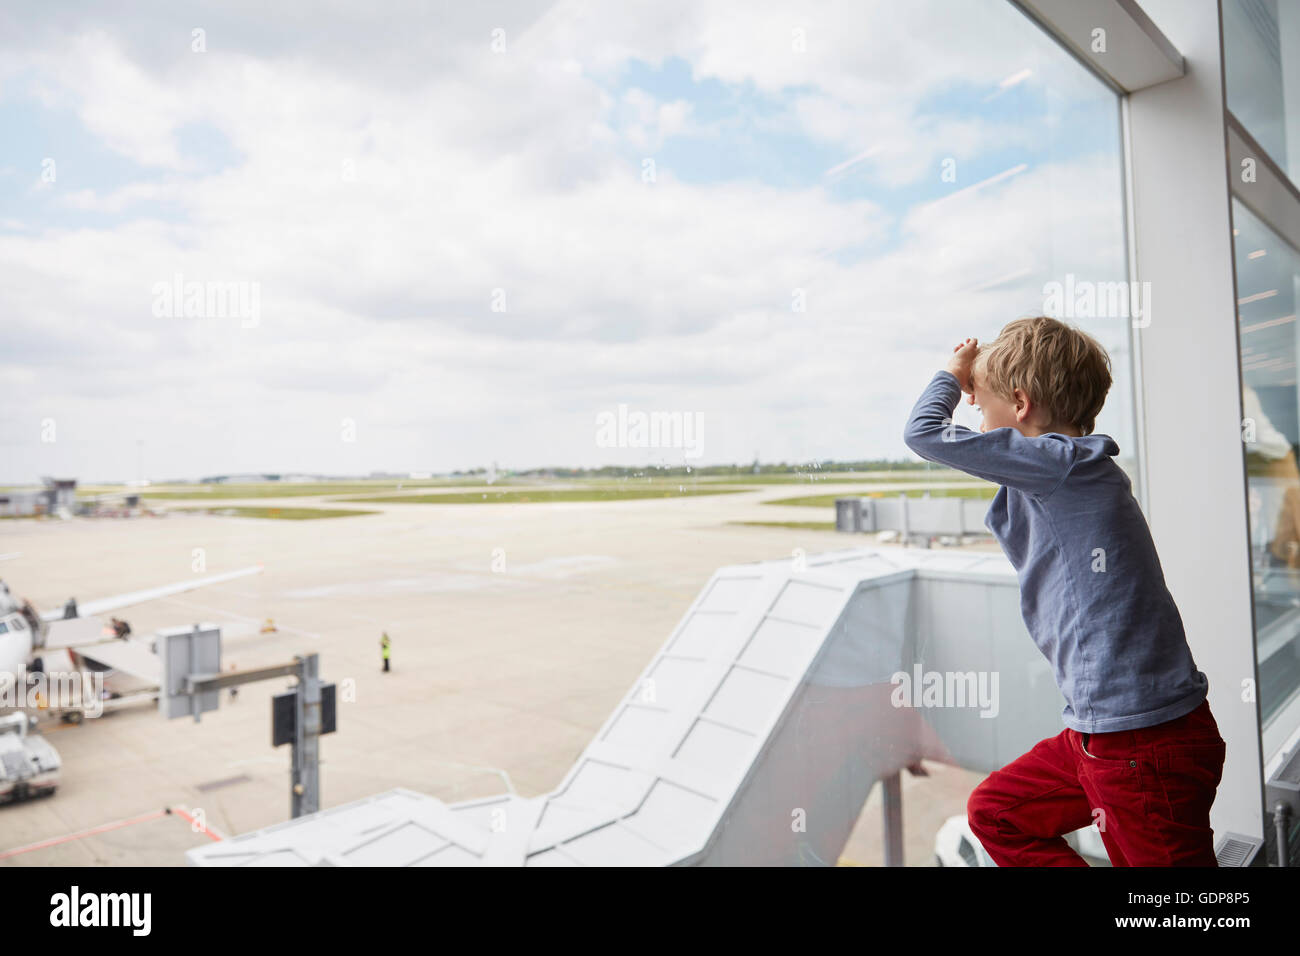 Boy looking out of airport window at runway Stock Photo